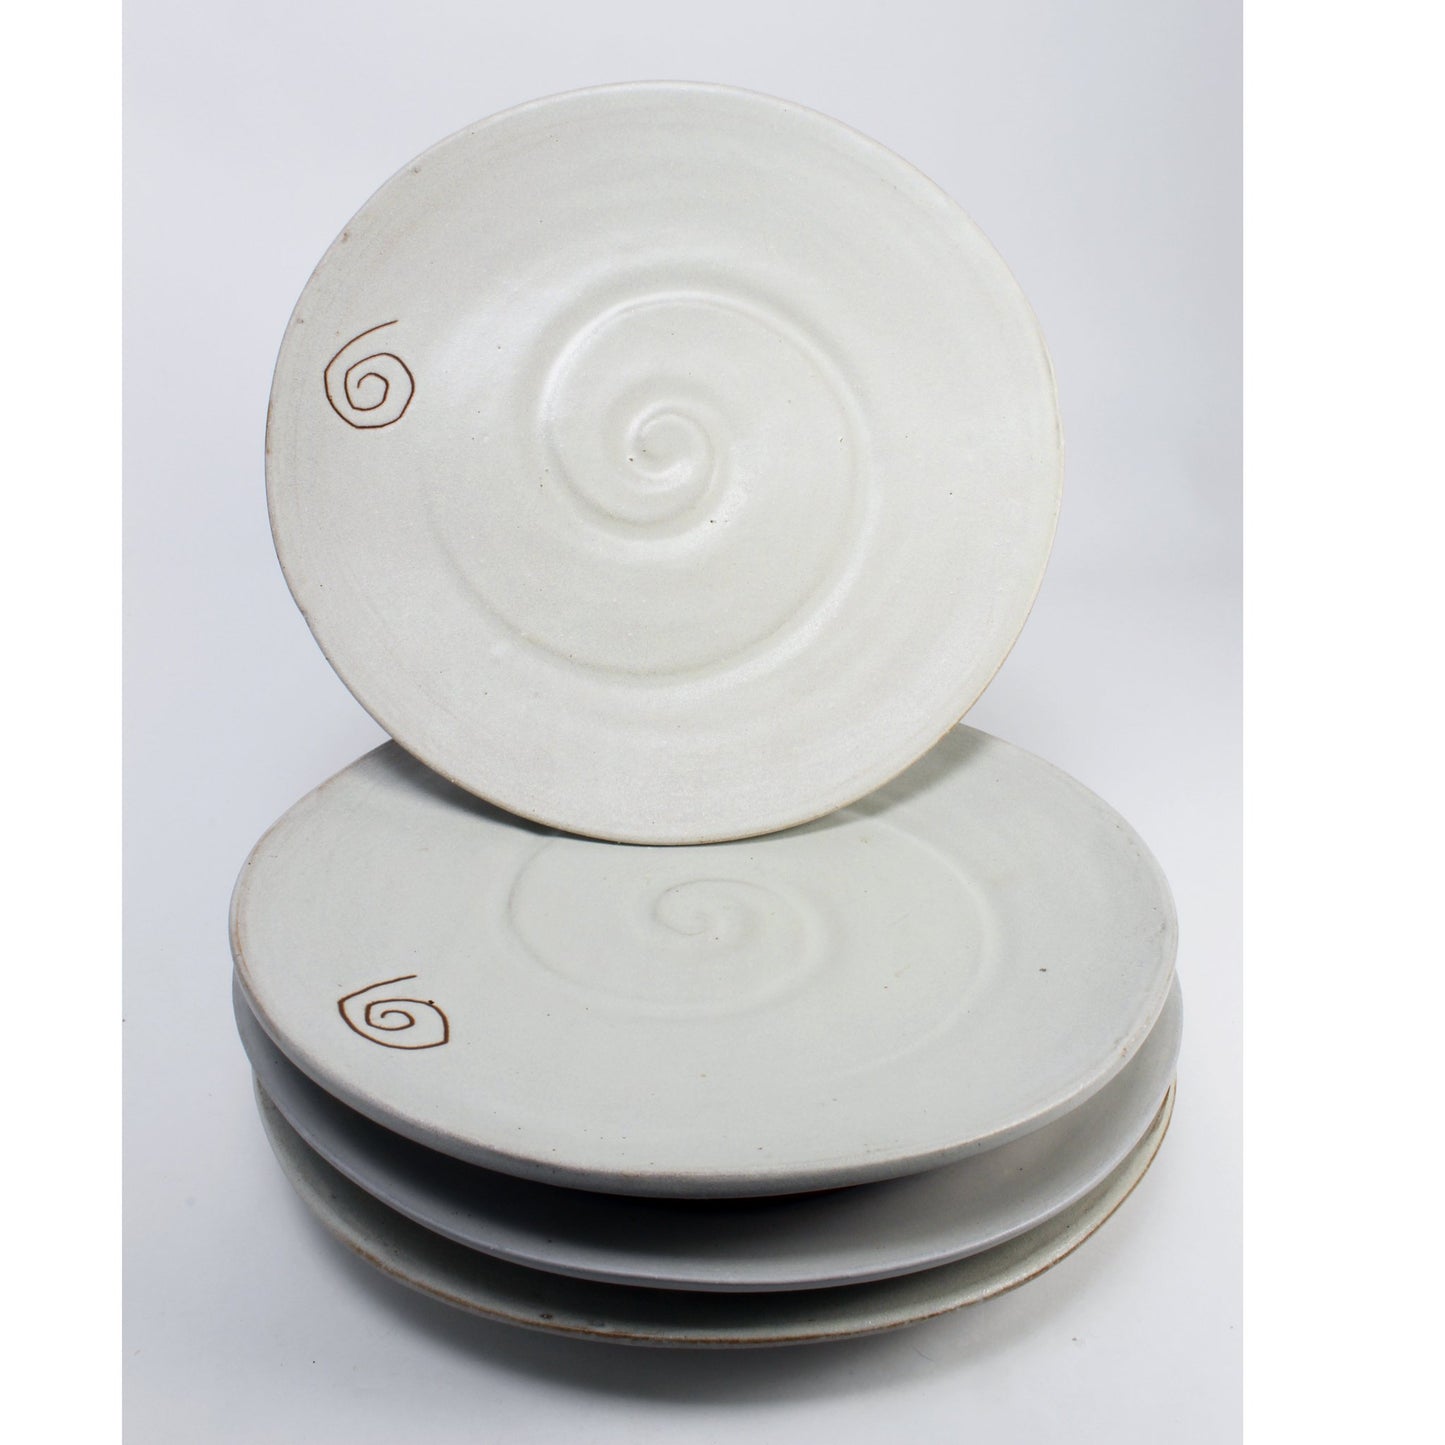 Dinner Plates - White with Spiral Design - Set of 4